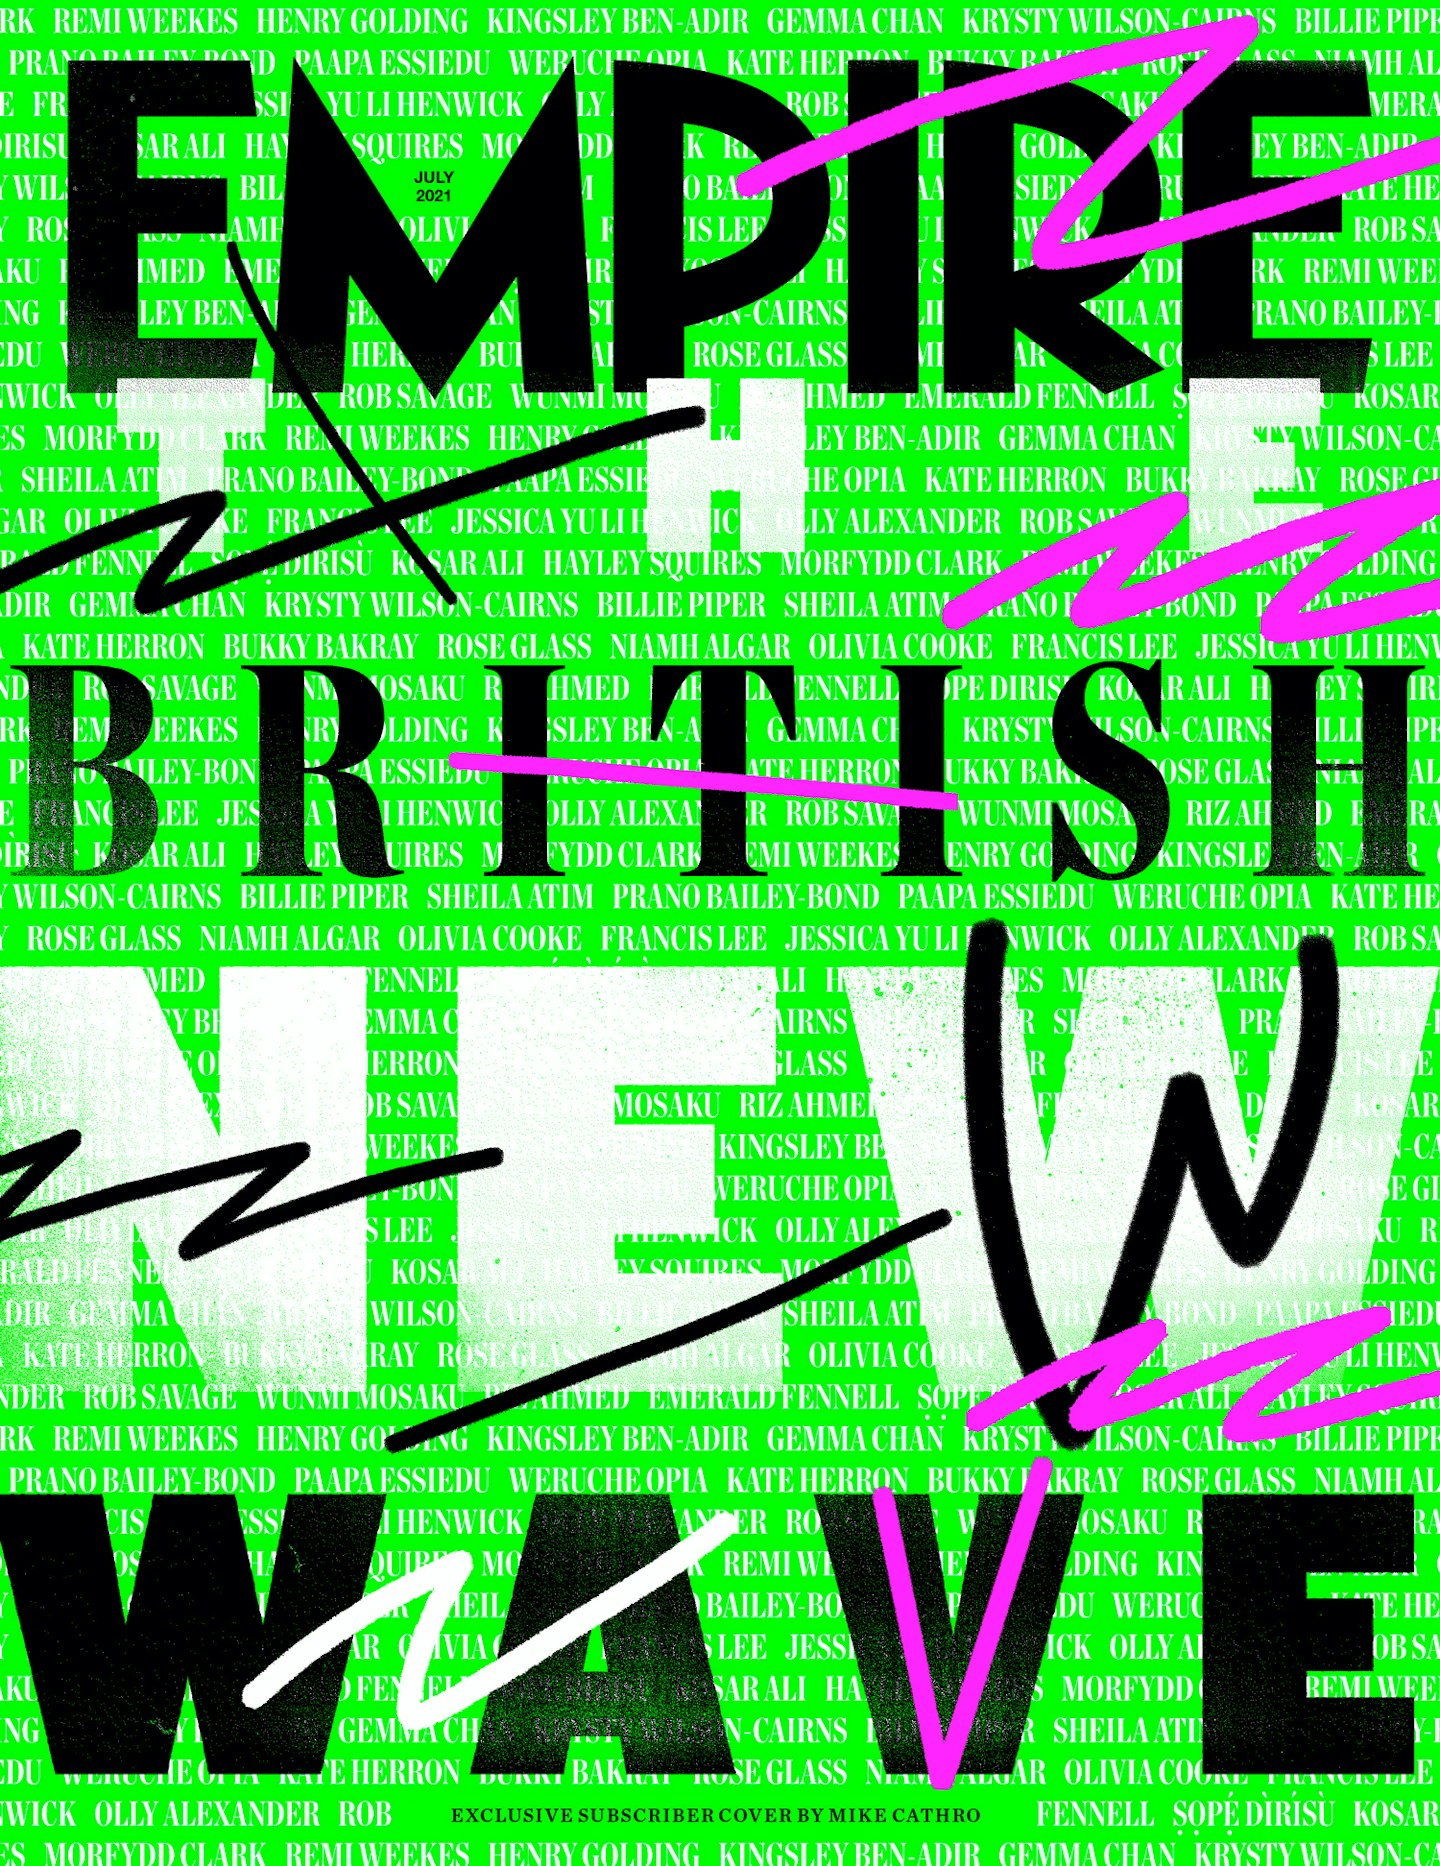 Empire – July 2021 subscriber cover